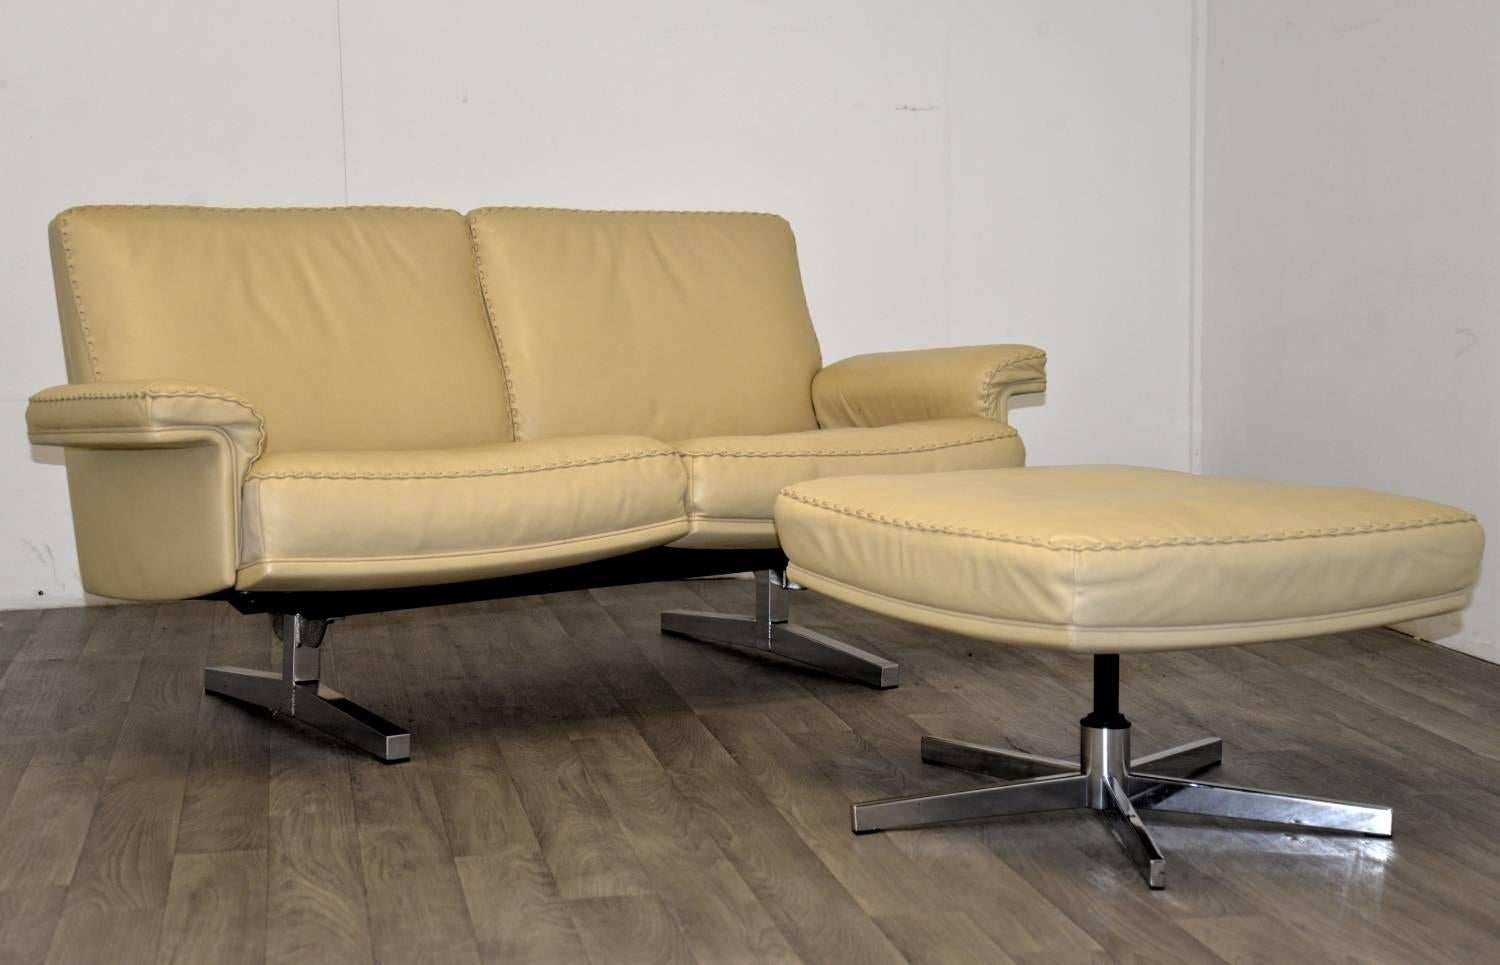 Discounted airfreight for our US Continent and International customers ( from 2 weeks door to door)

We are delighted to bring to you a rarely available and highly desirable retro De Sede DS 35 two-seat sofa or loveseat with ottoman in beautiful